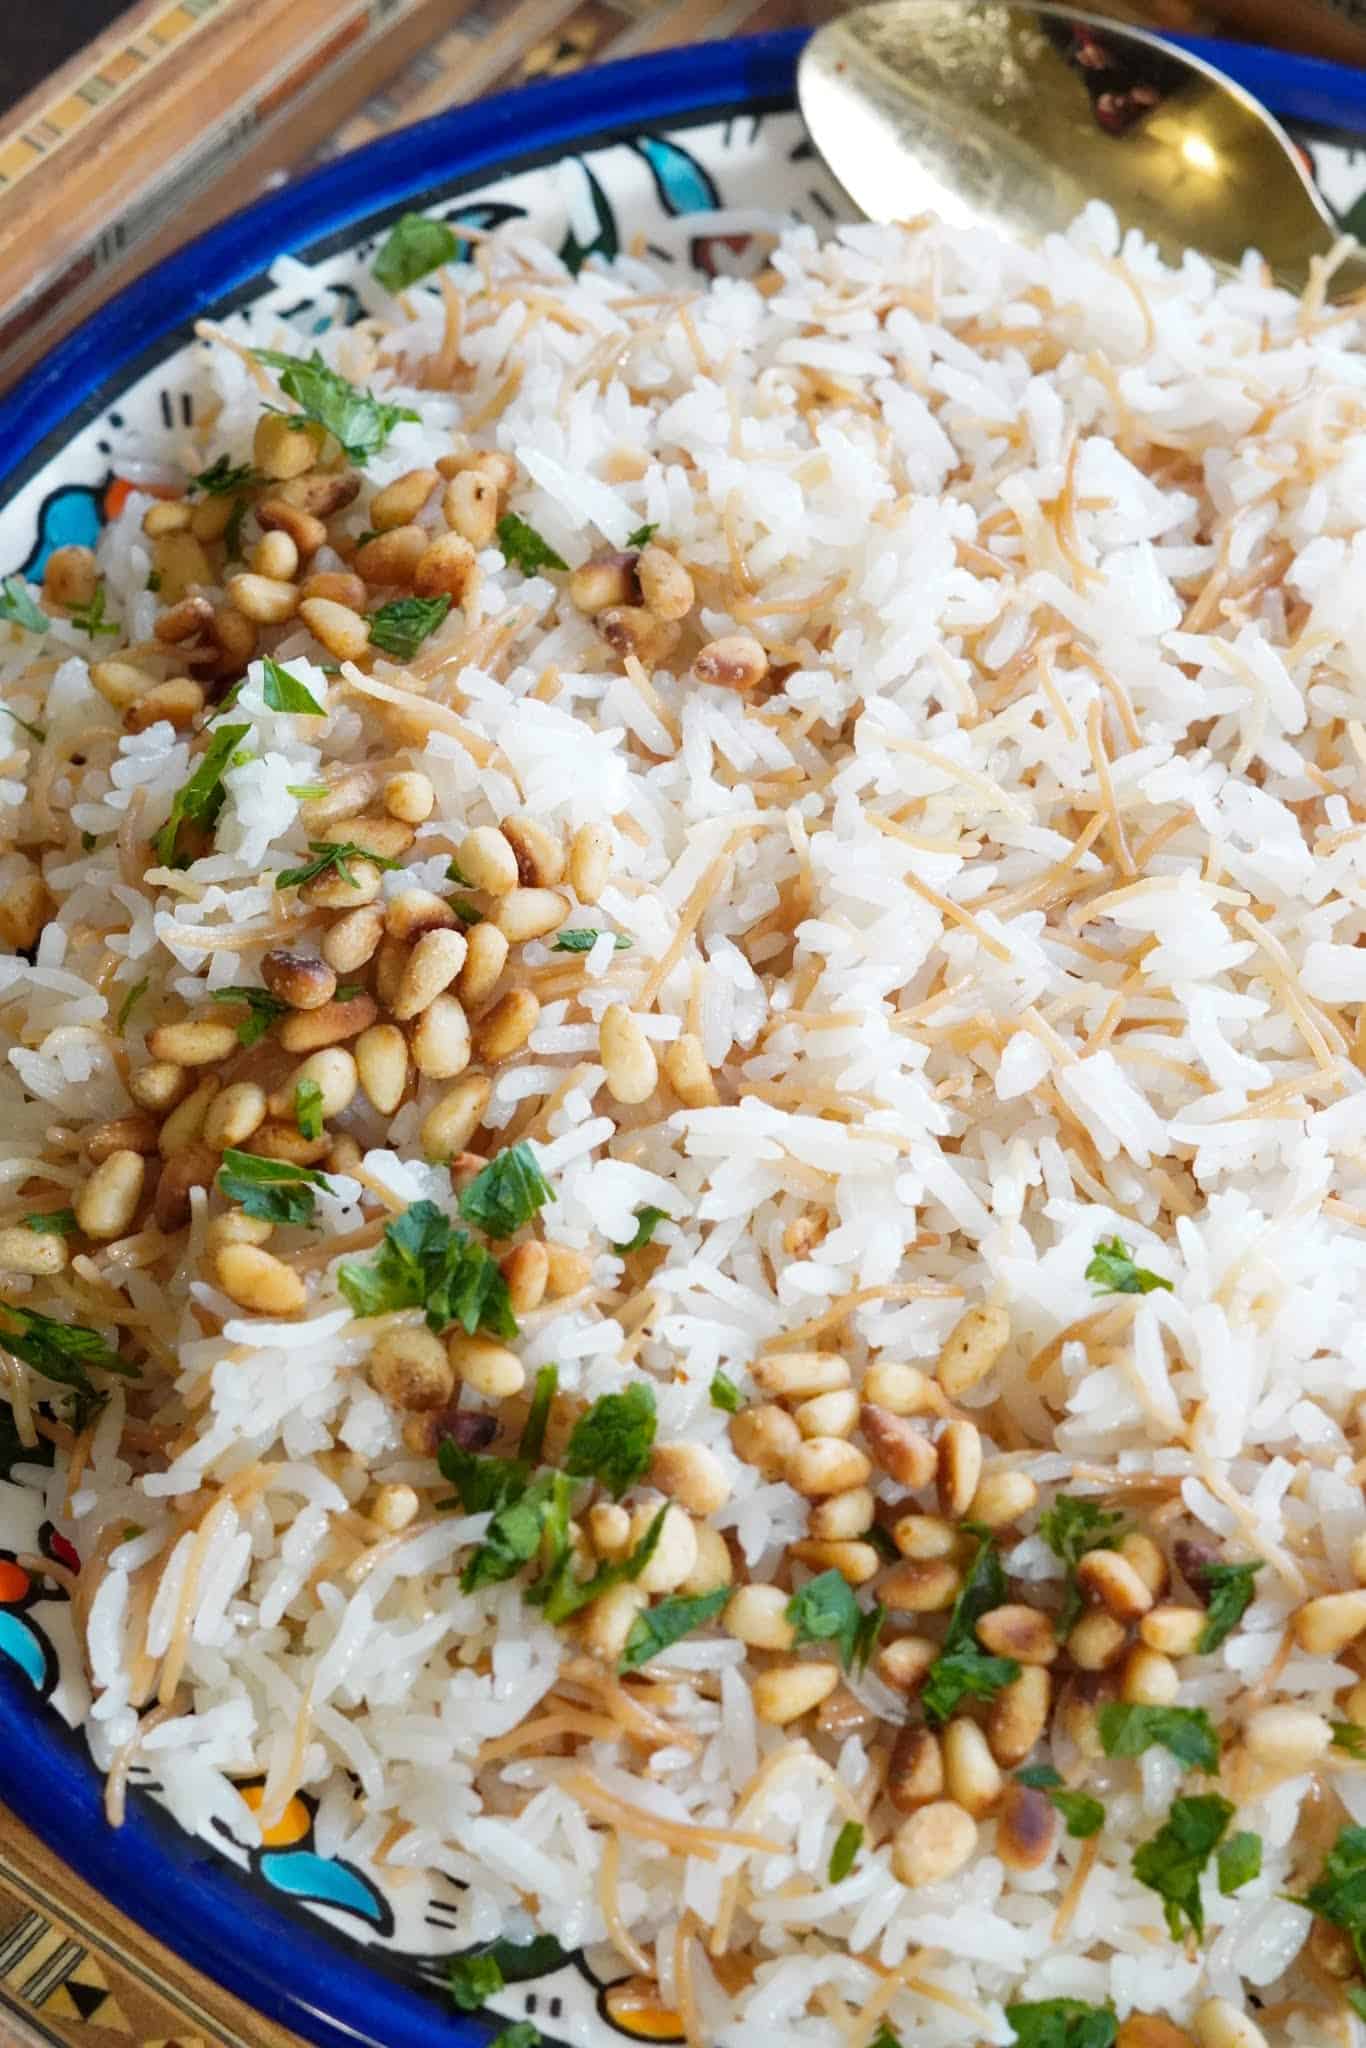 A generous plate of vermicelli rice garnished with toasted pine nuts.